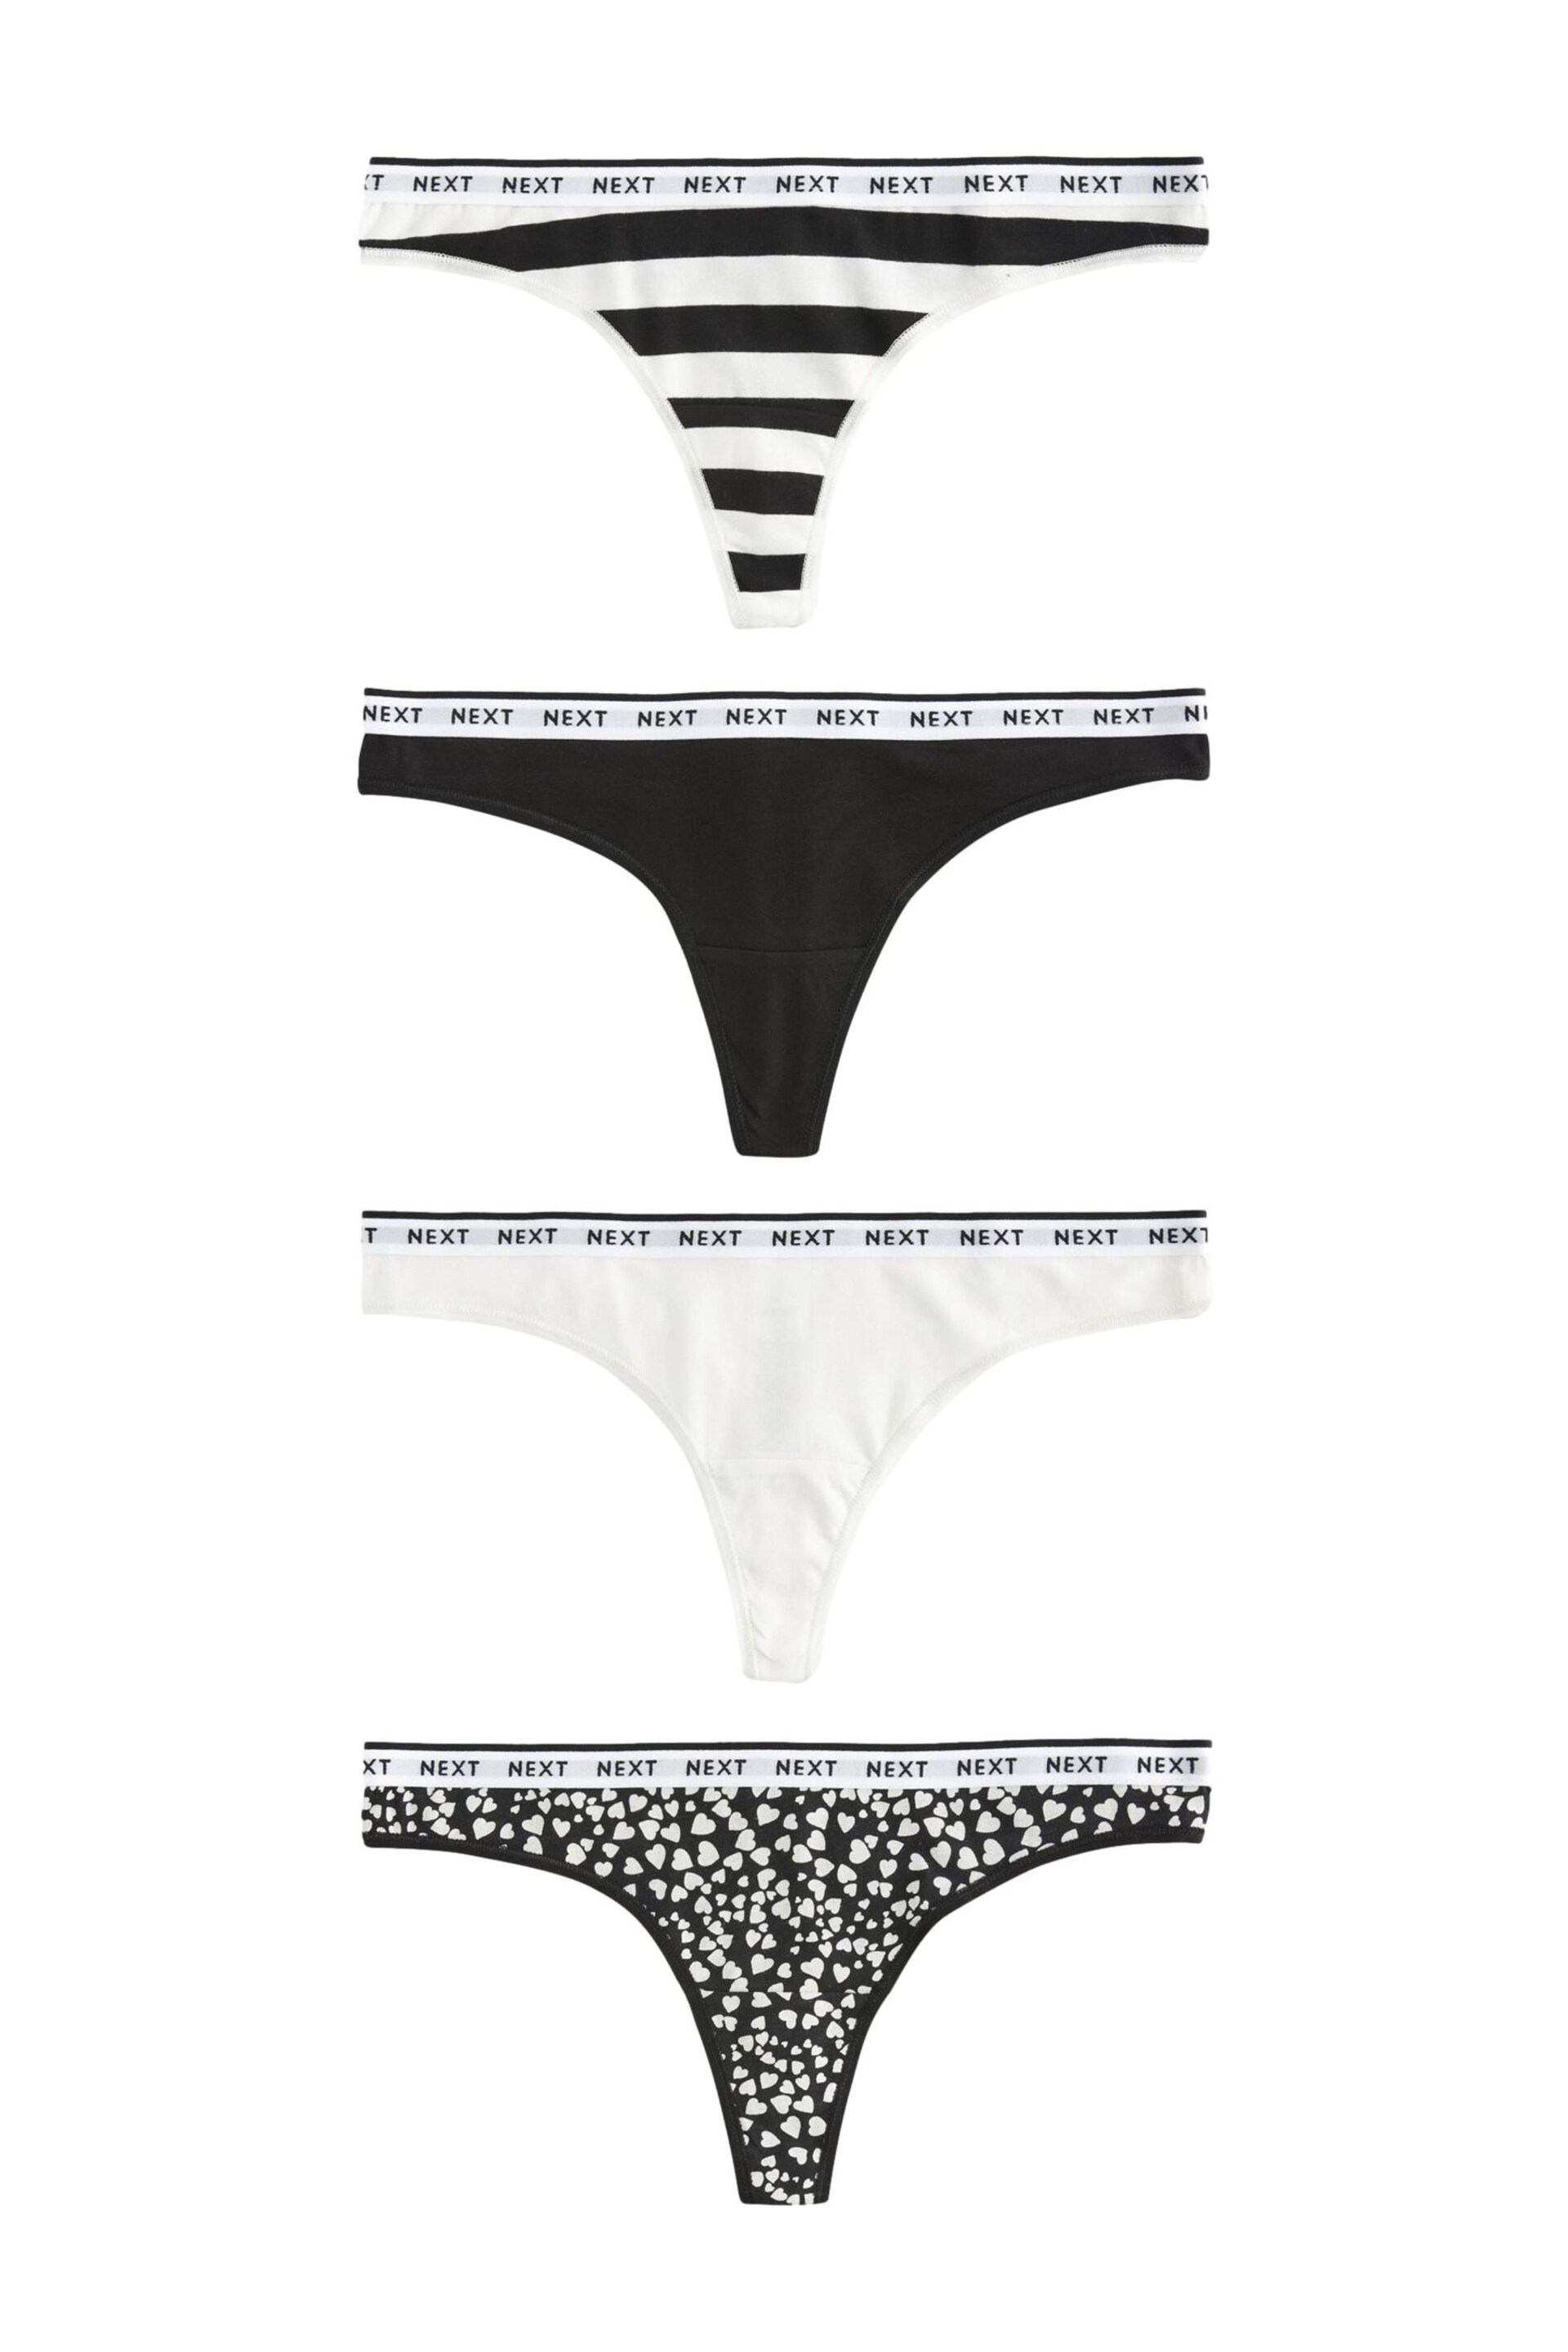 White/Black Printed Thong Cotton Rich Logo Knickers 4 Pack - Image 5 of 10